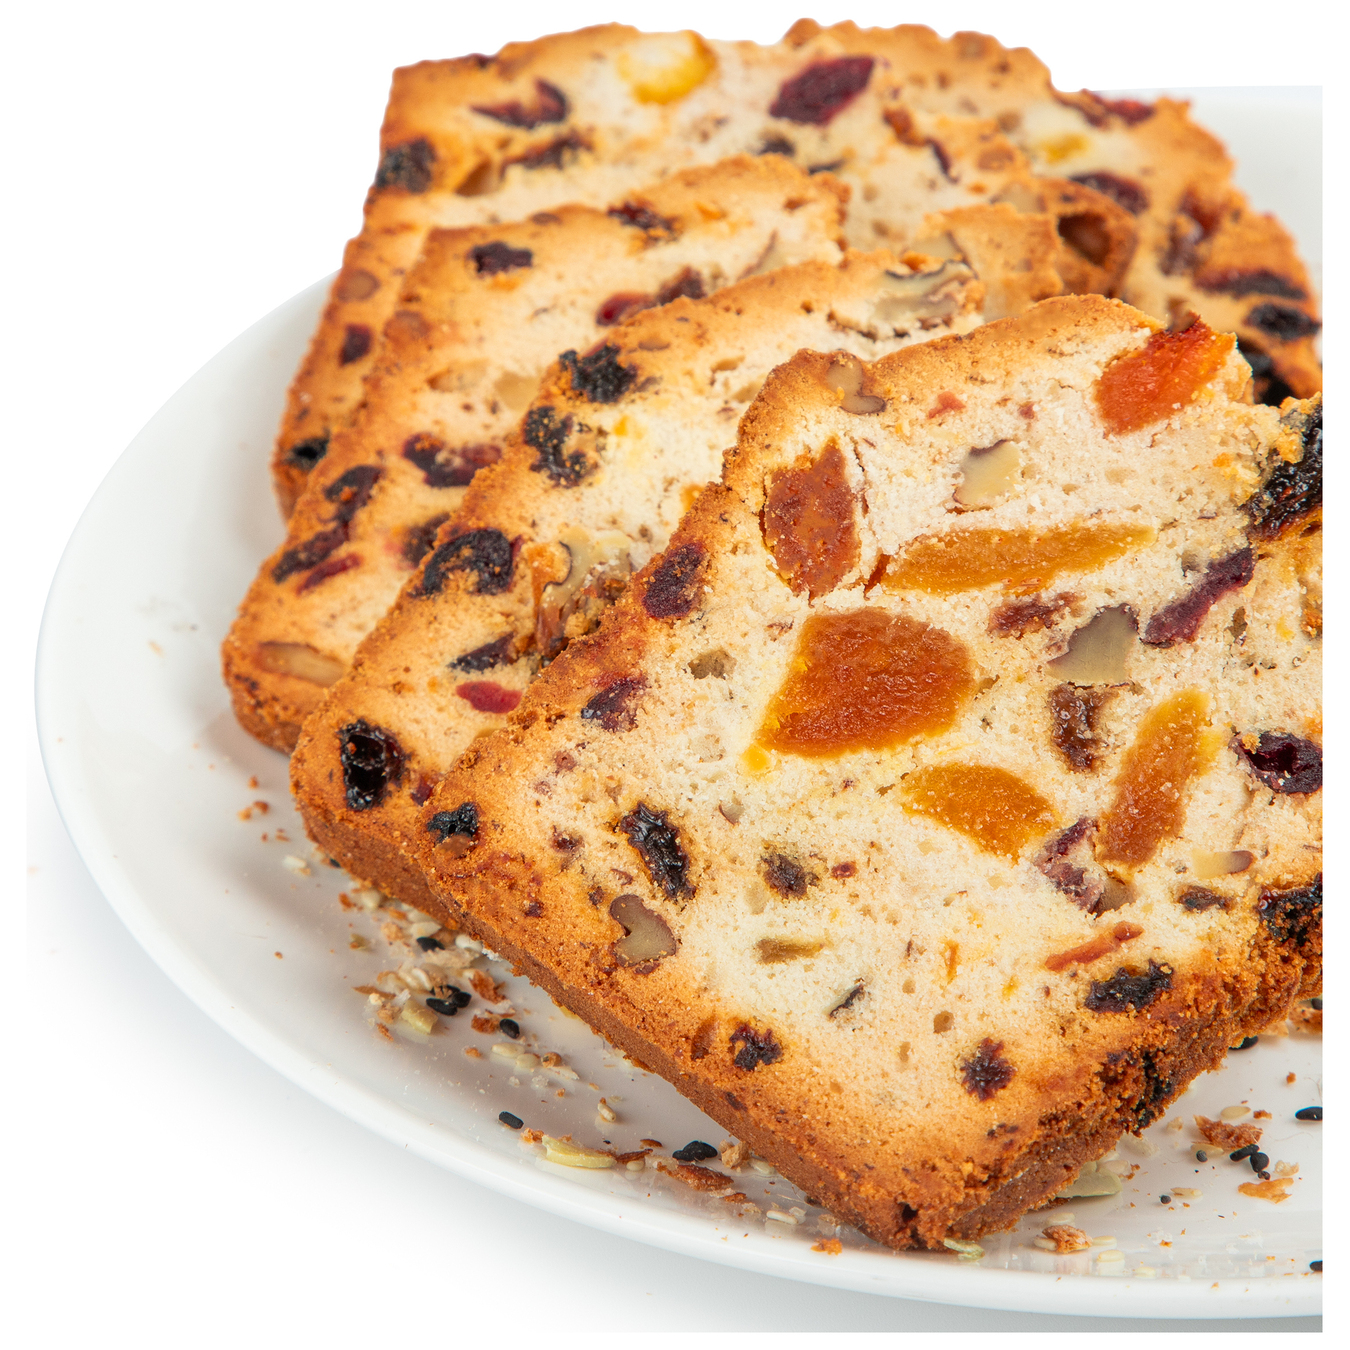 Cake with dried fruits